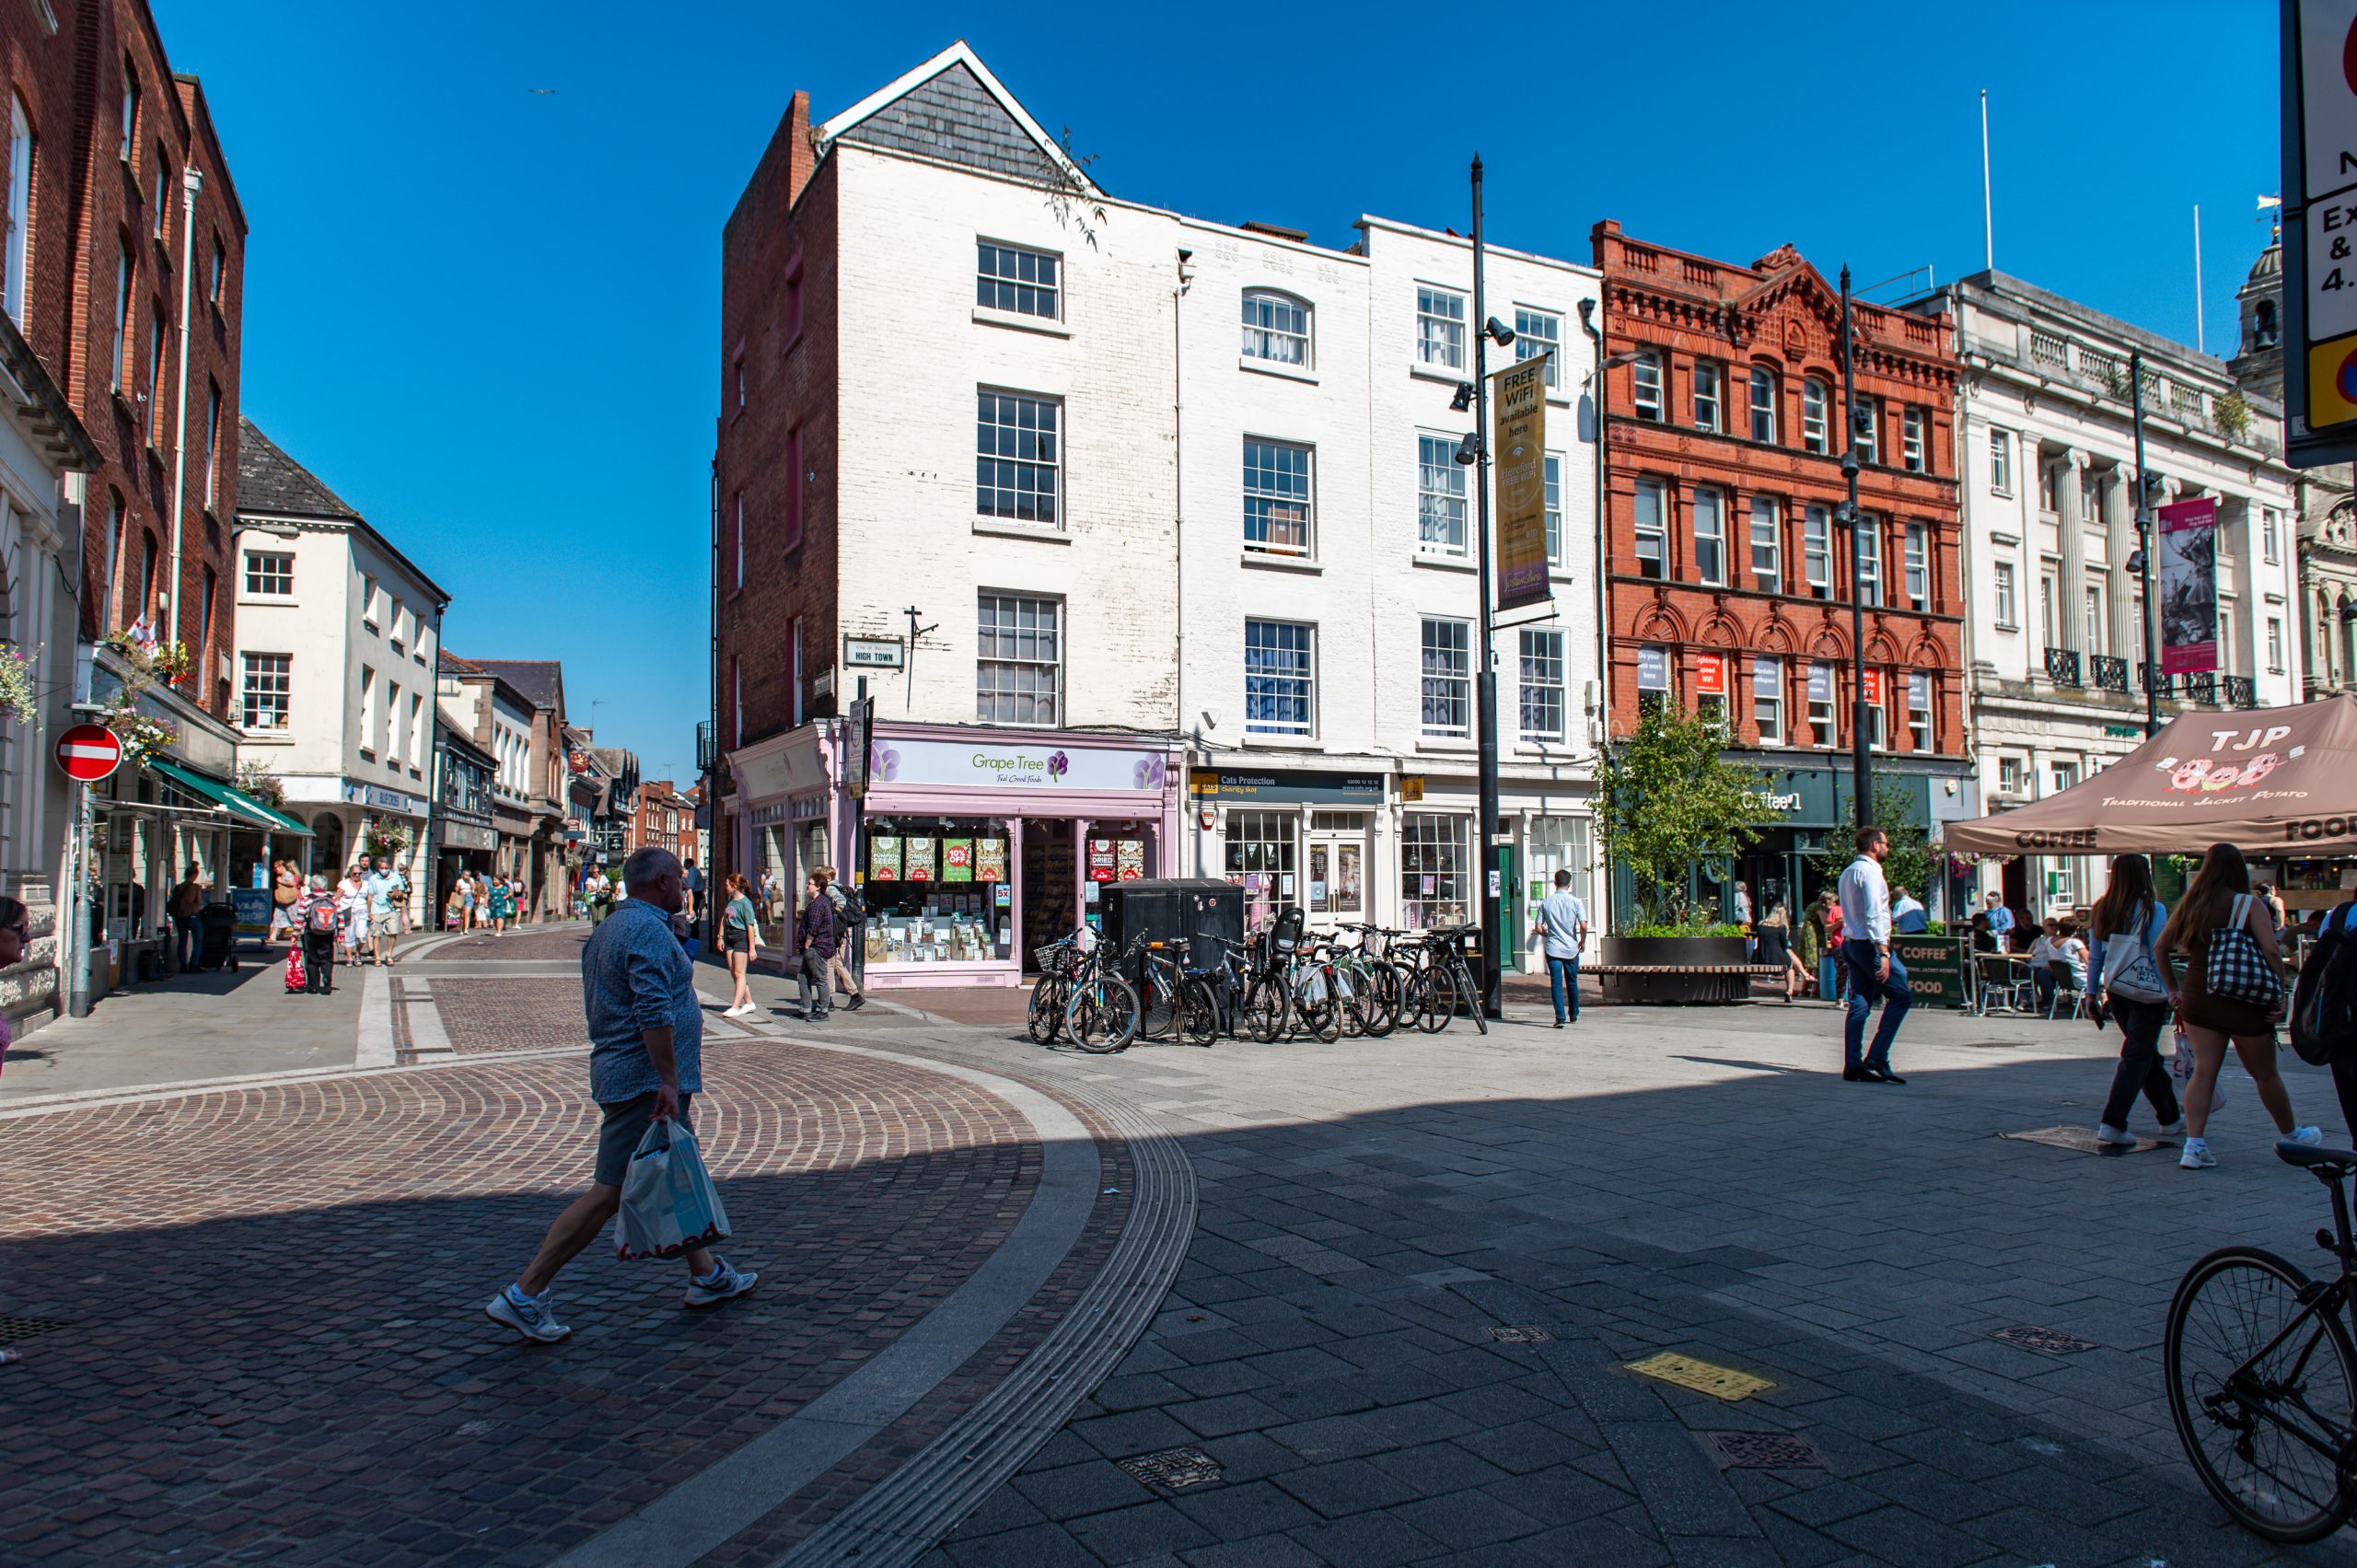 NEWS | Hereford set to become on of the ‘greenest and fairest’ cities in England after £22 million funding boost